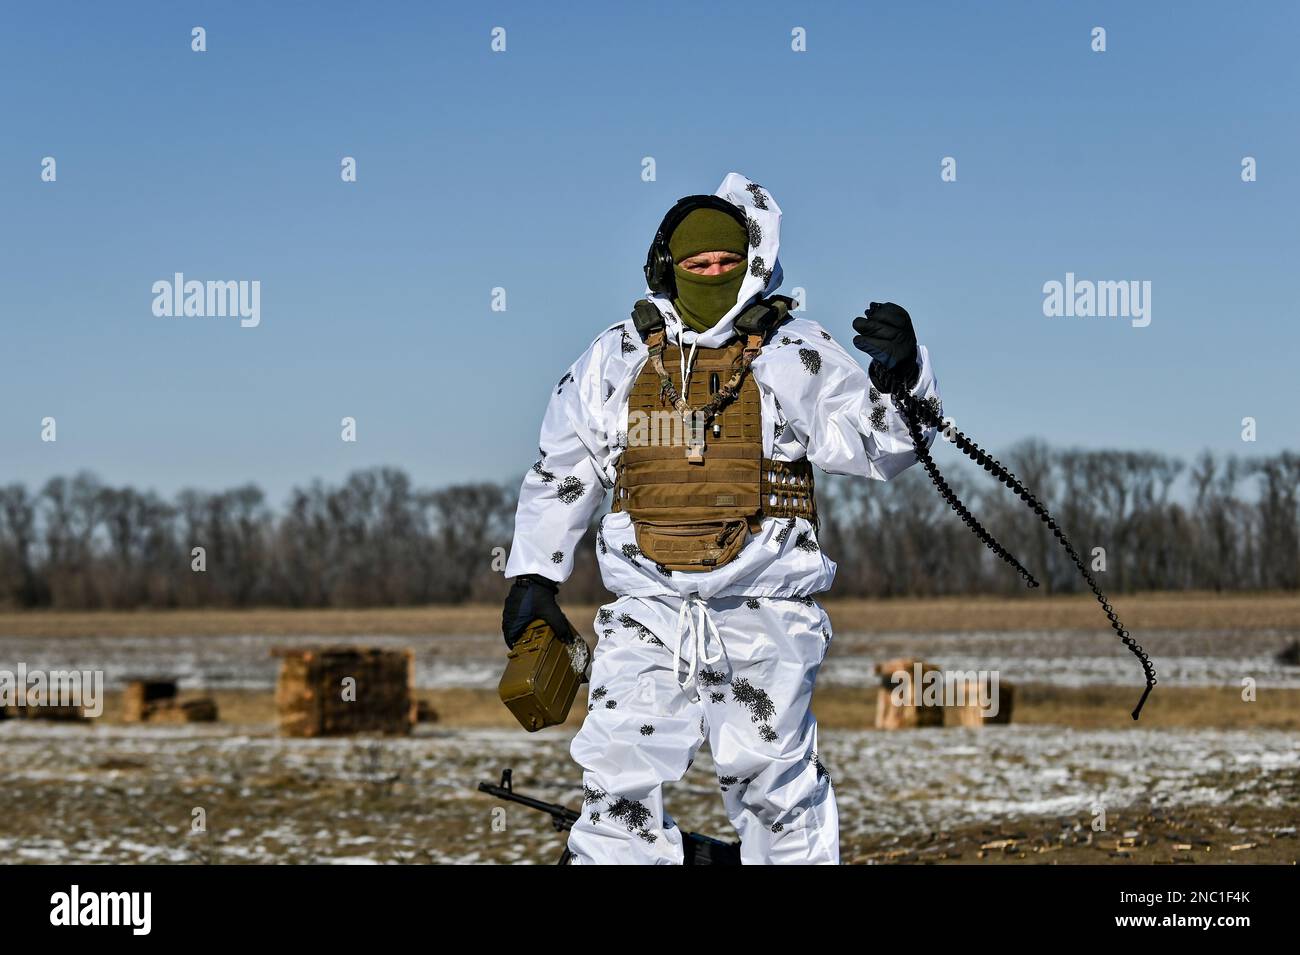 ZAPORIZHZHIA REGION, UKRAINE - FEBRUARY 8, 2023 - A soldier in a winter camouflage suit holds an ammunition box and cartridge belt as the training ses Stock Photo